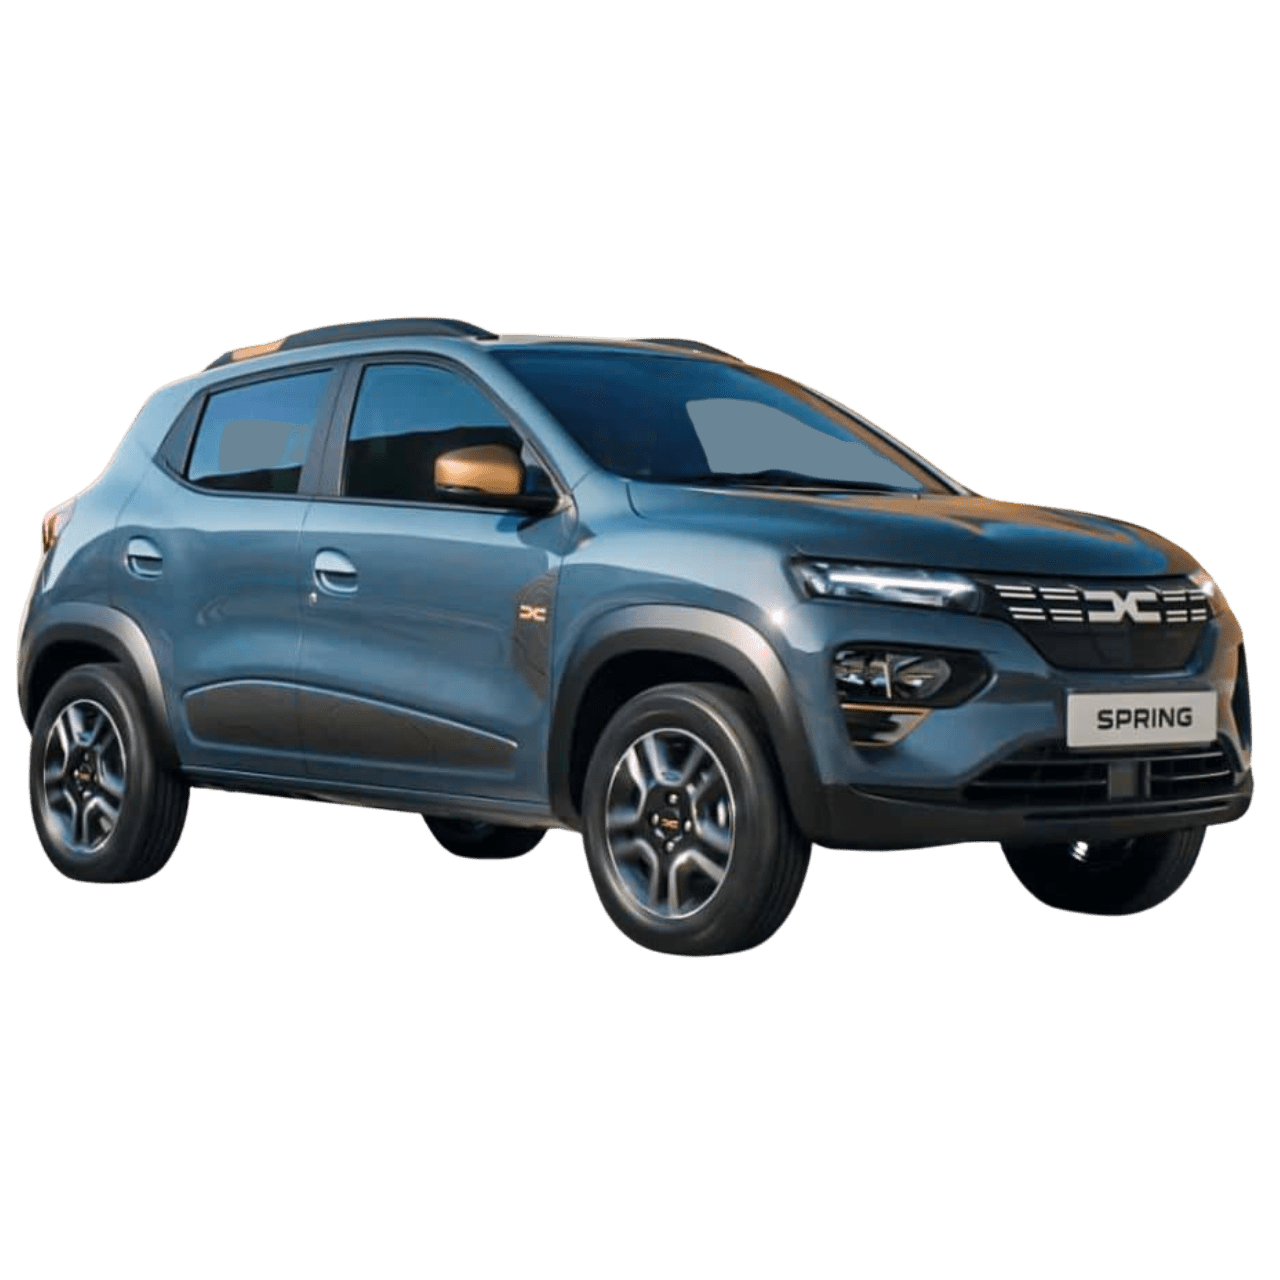 https://images.frandroid.com/wp-content/uploads/2023/05/dacia-spring-electric-65-frandroid-2023.png